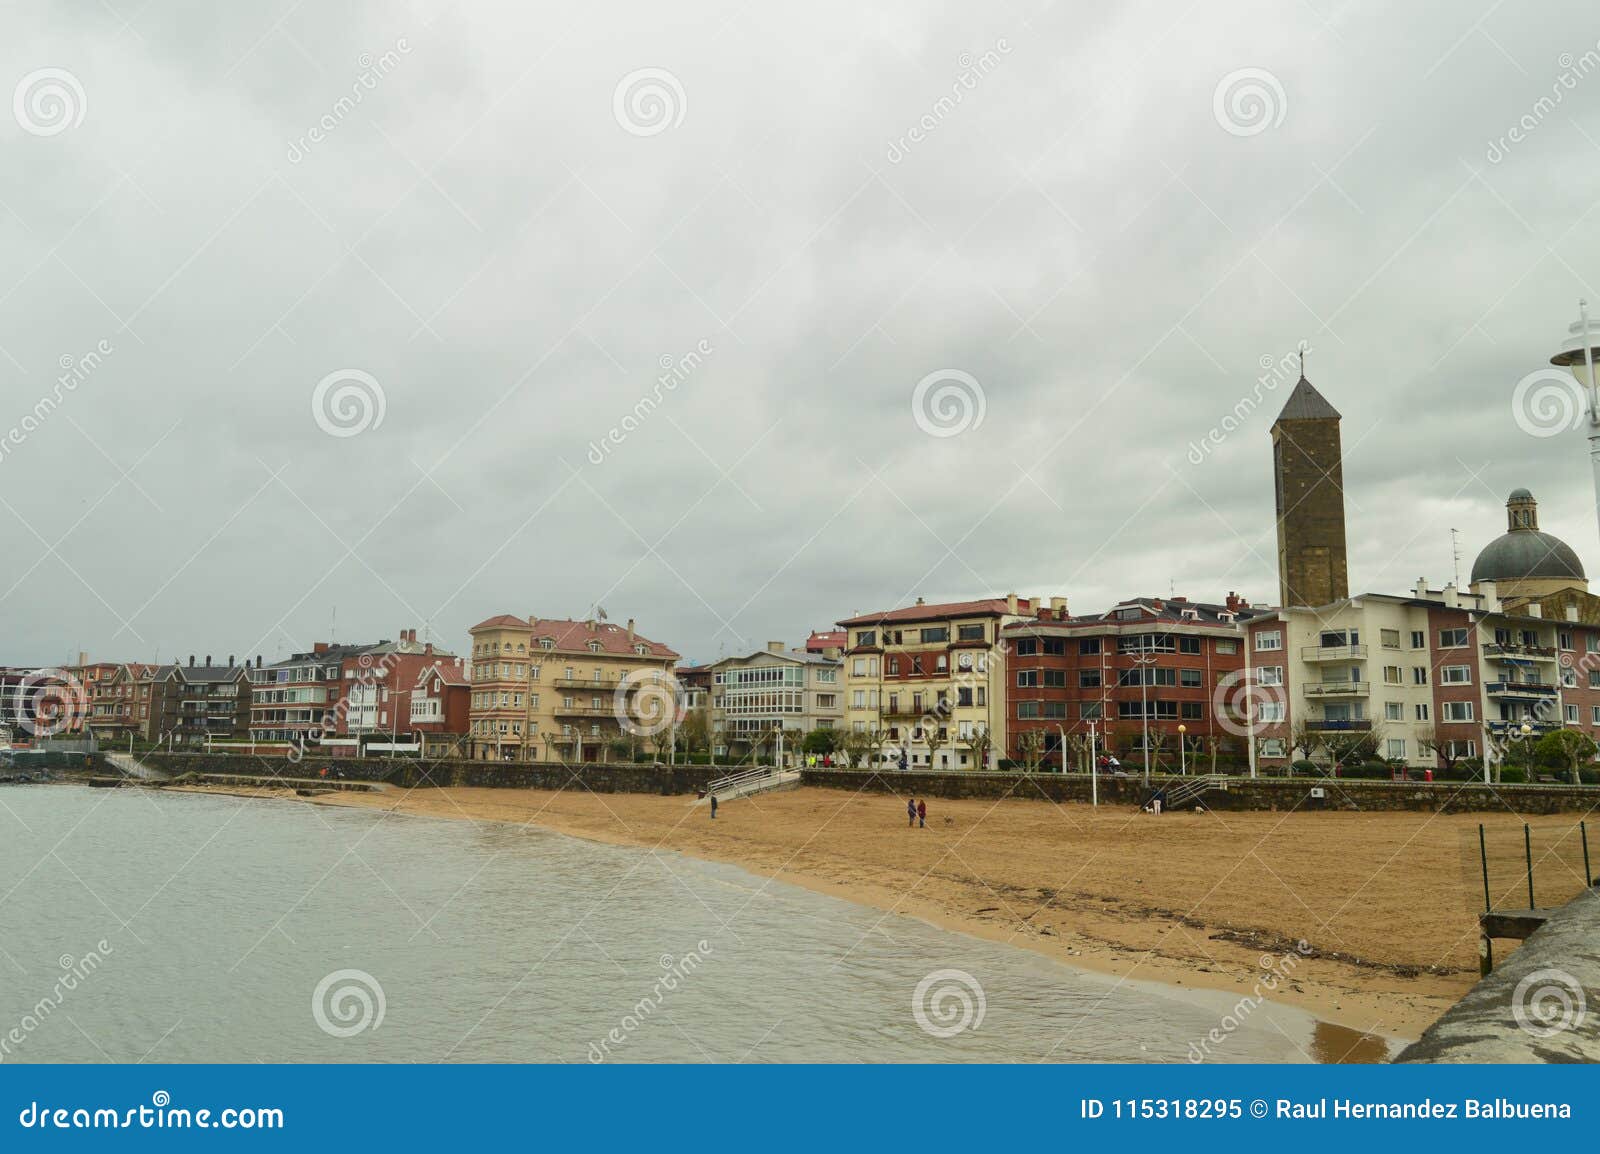 beach of the sands of getxo. nature cantabrico travel.